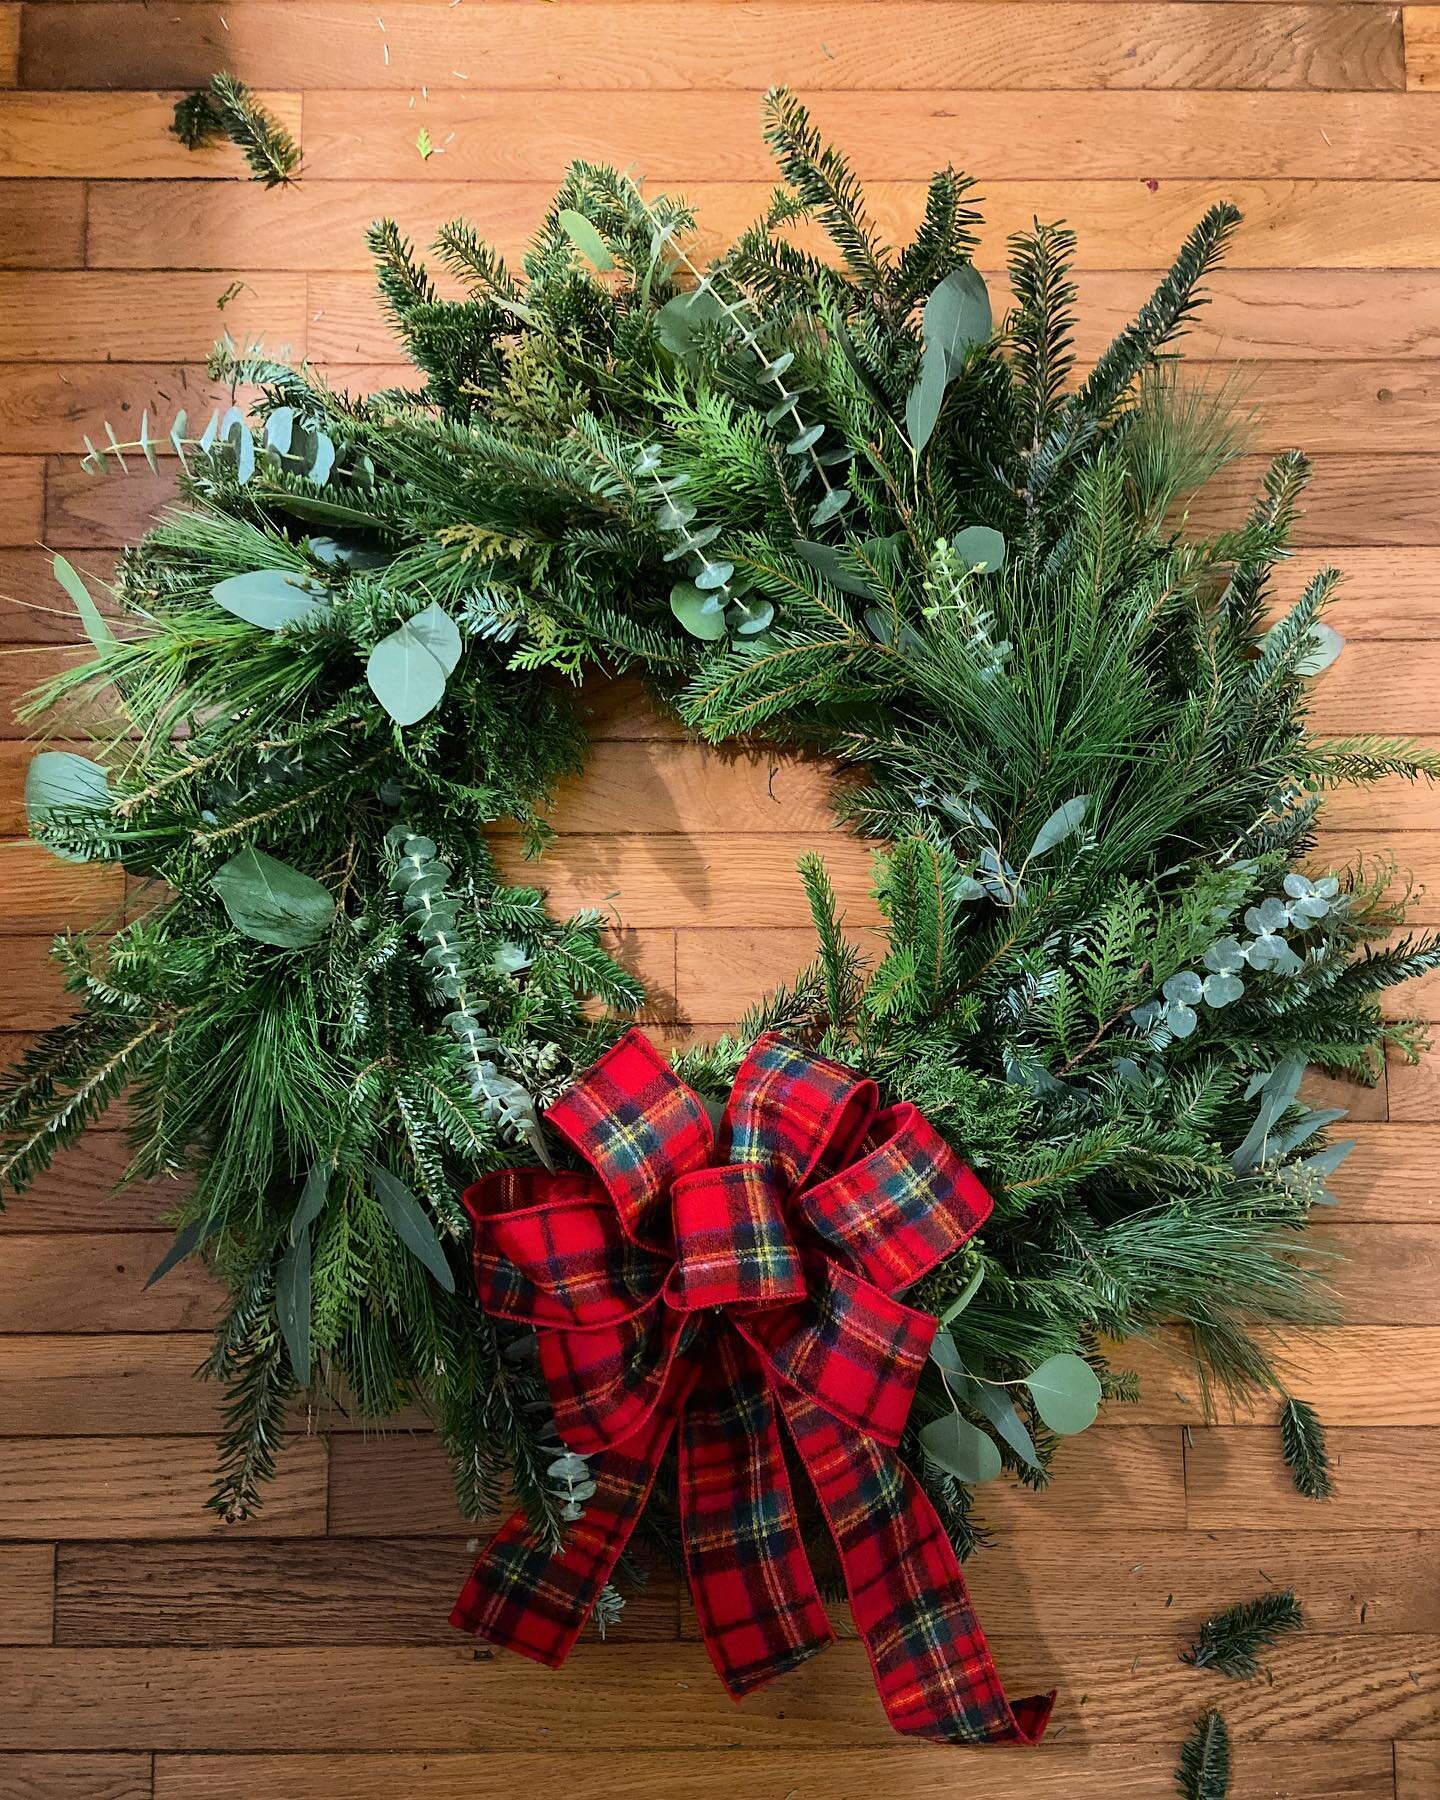 The wreath workshop was so special. Currently dreaming up our next workshop for&hellip;.. February maybe? Early spring? What would you like to see, learn or create Margin for? We want to offer something that will bless you!! ✨✨